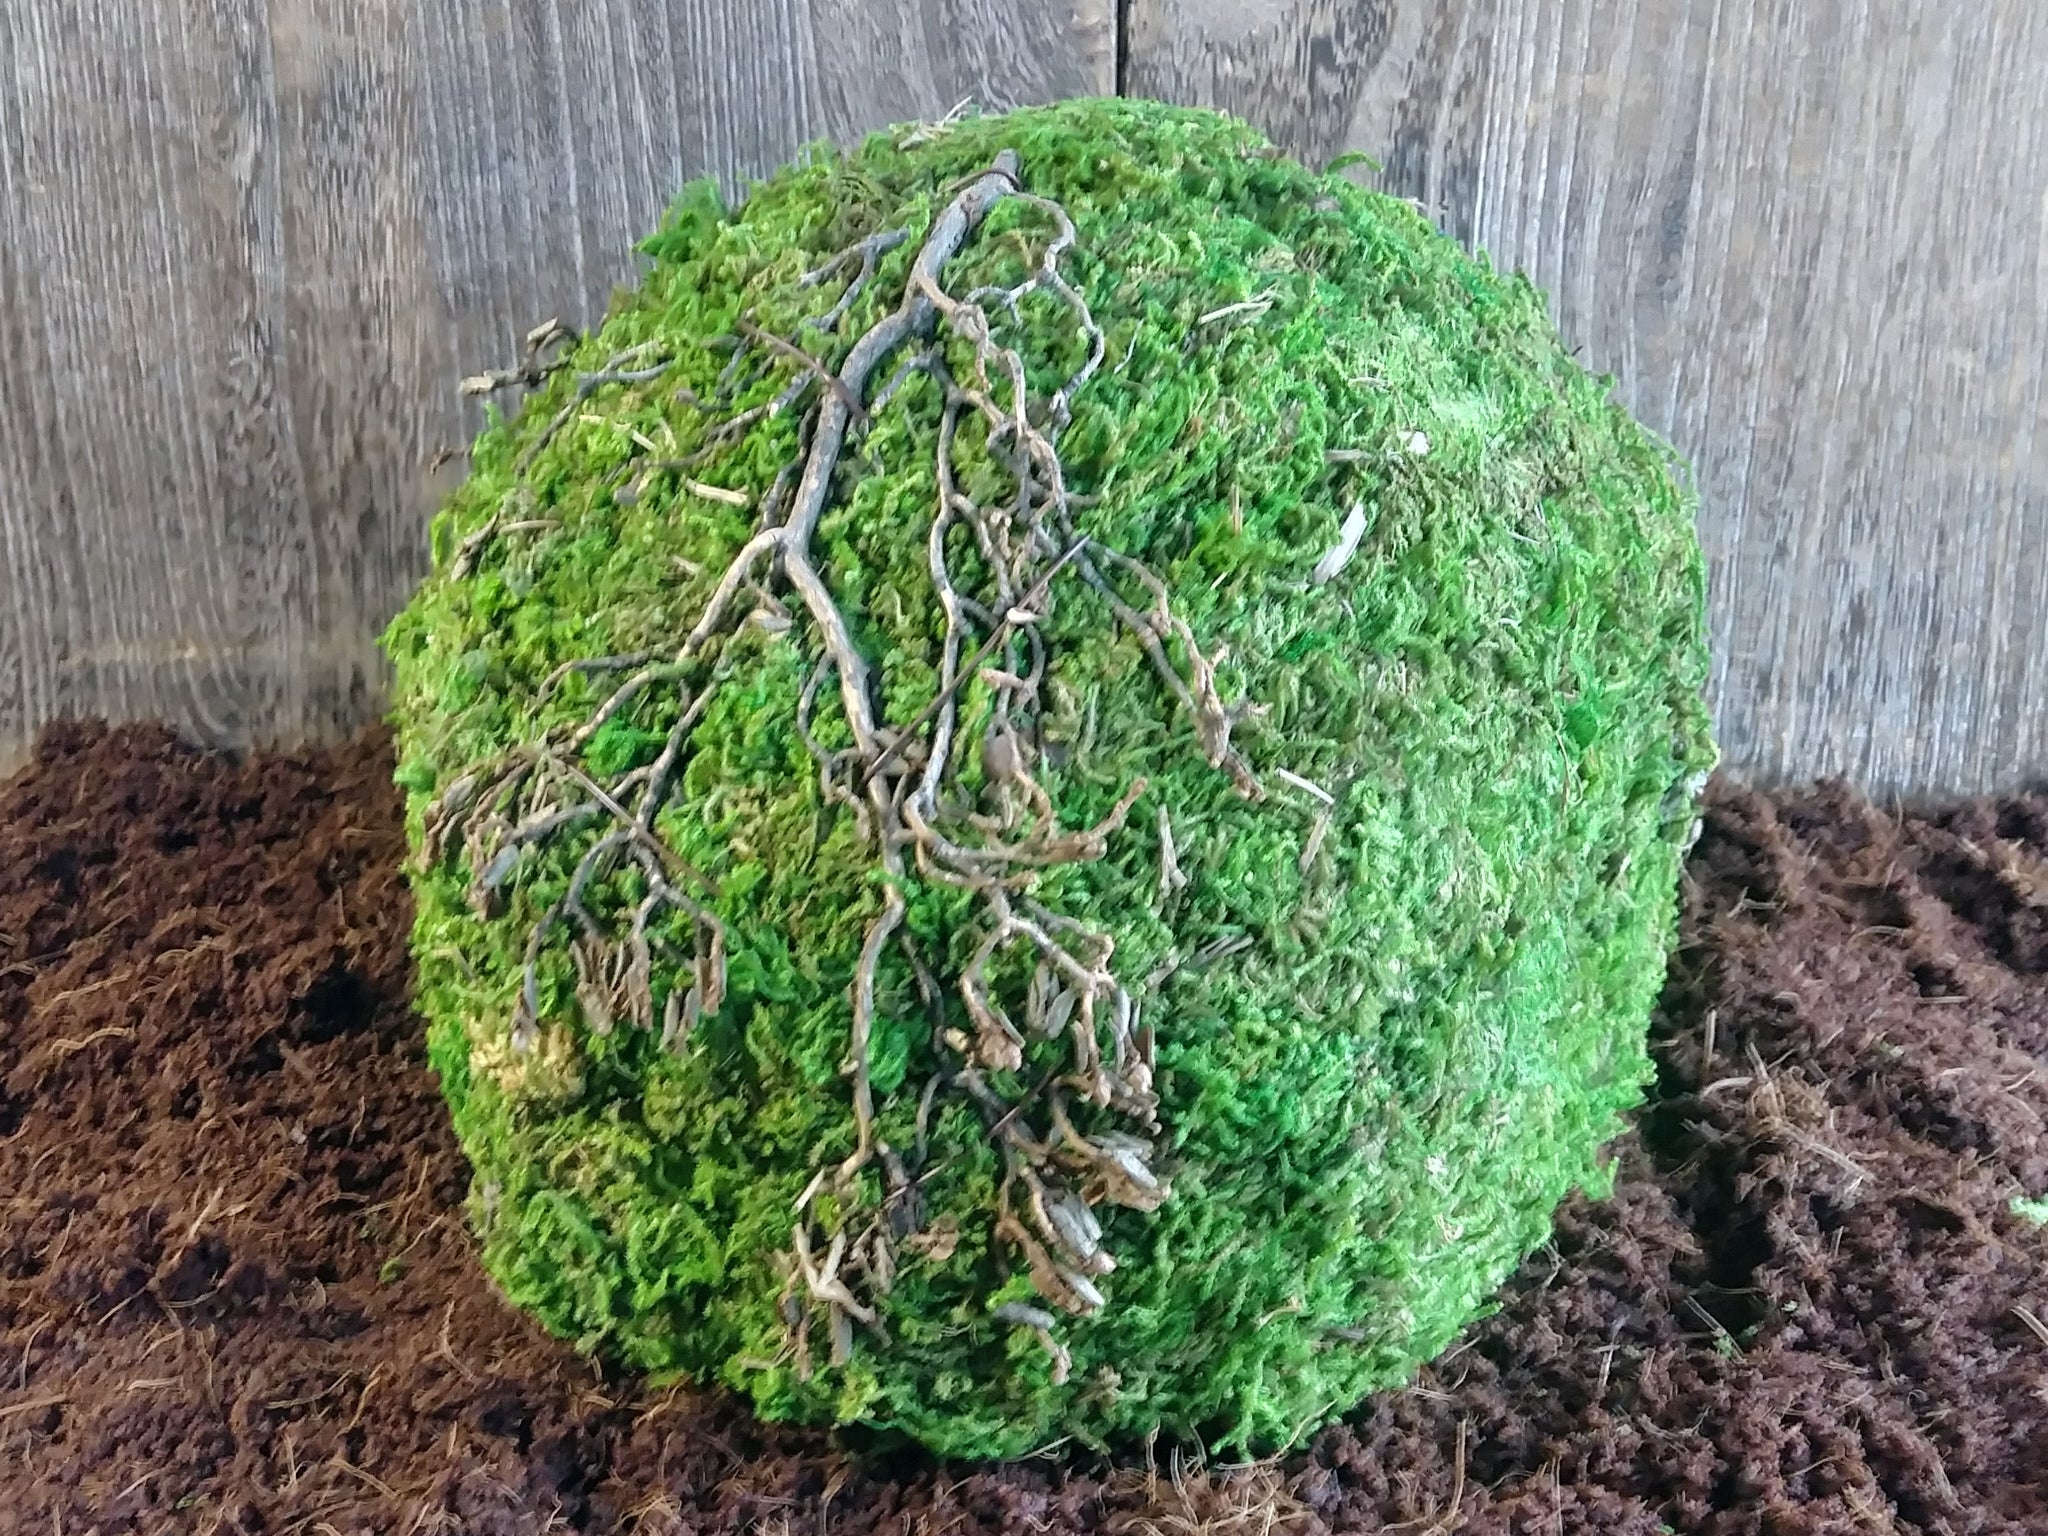 Galapagos Green Mossy Dome, 6